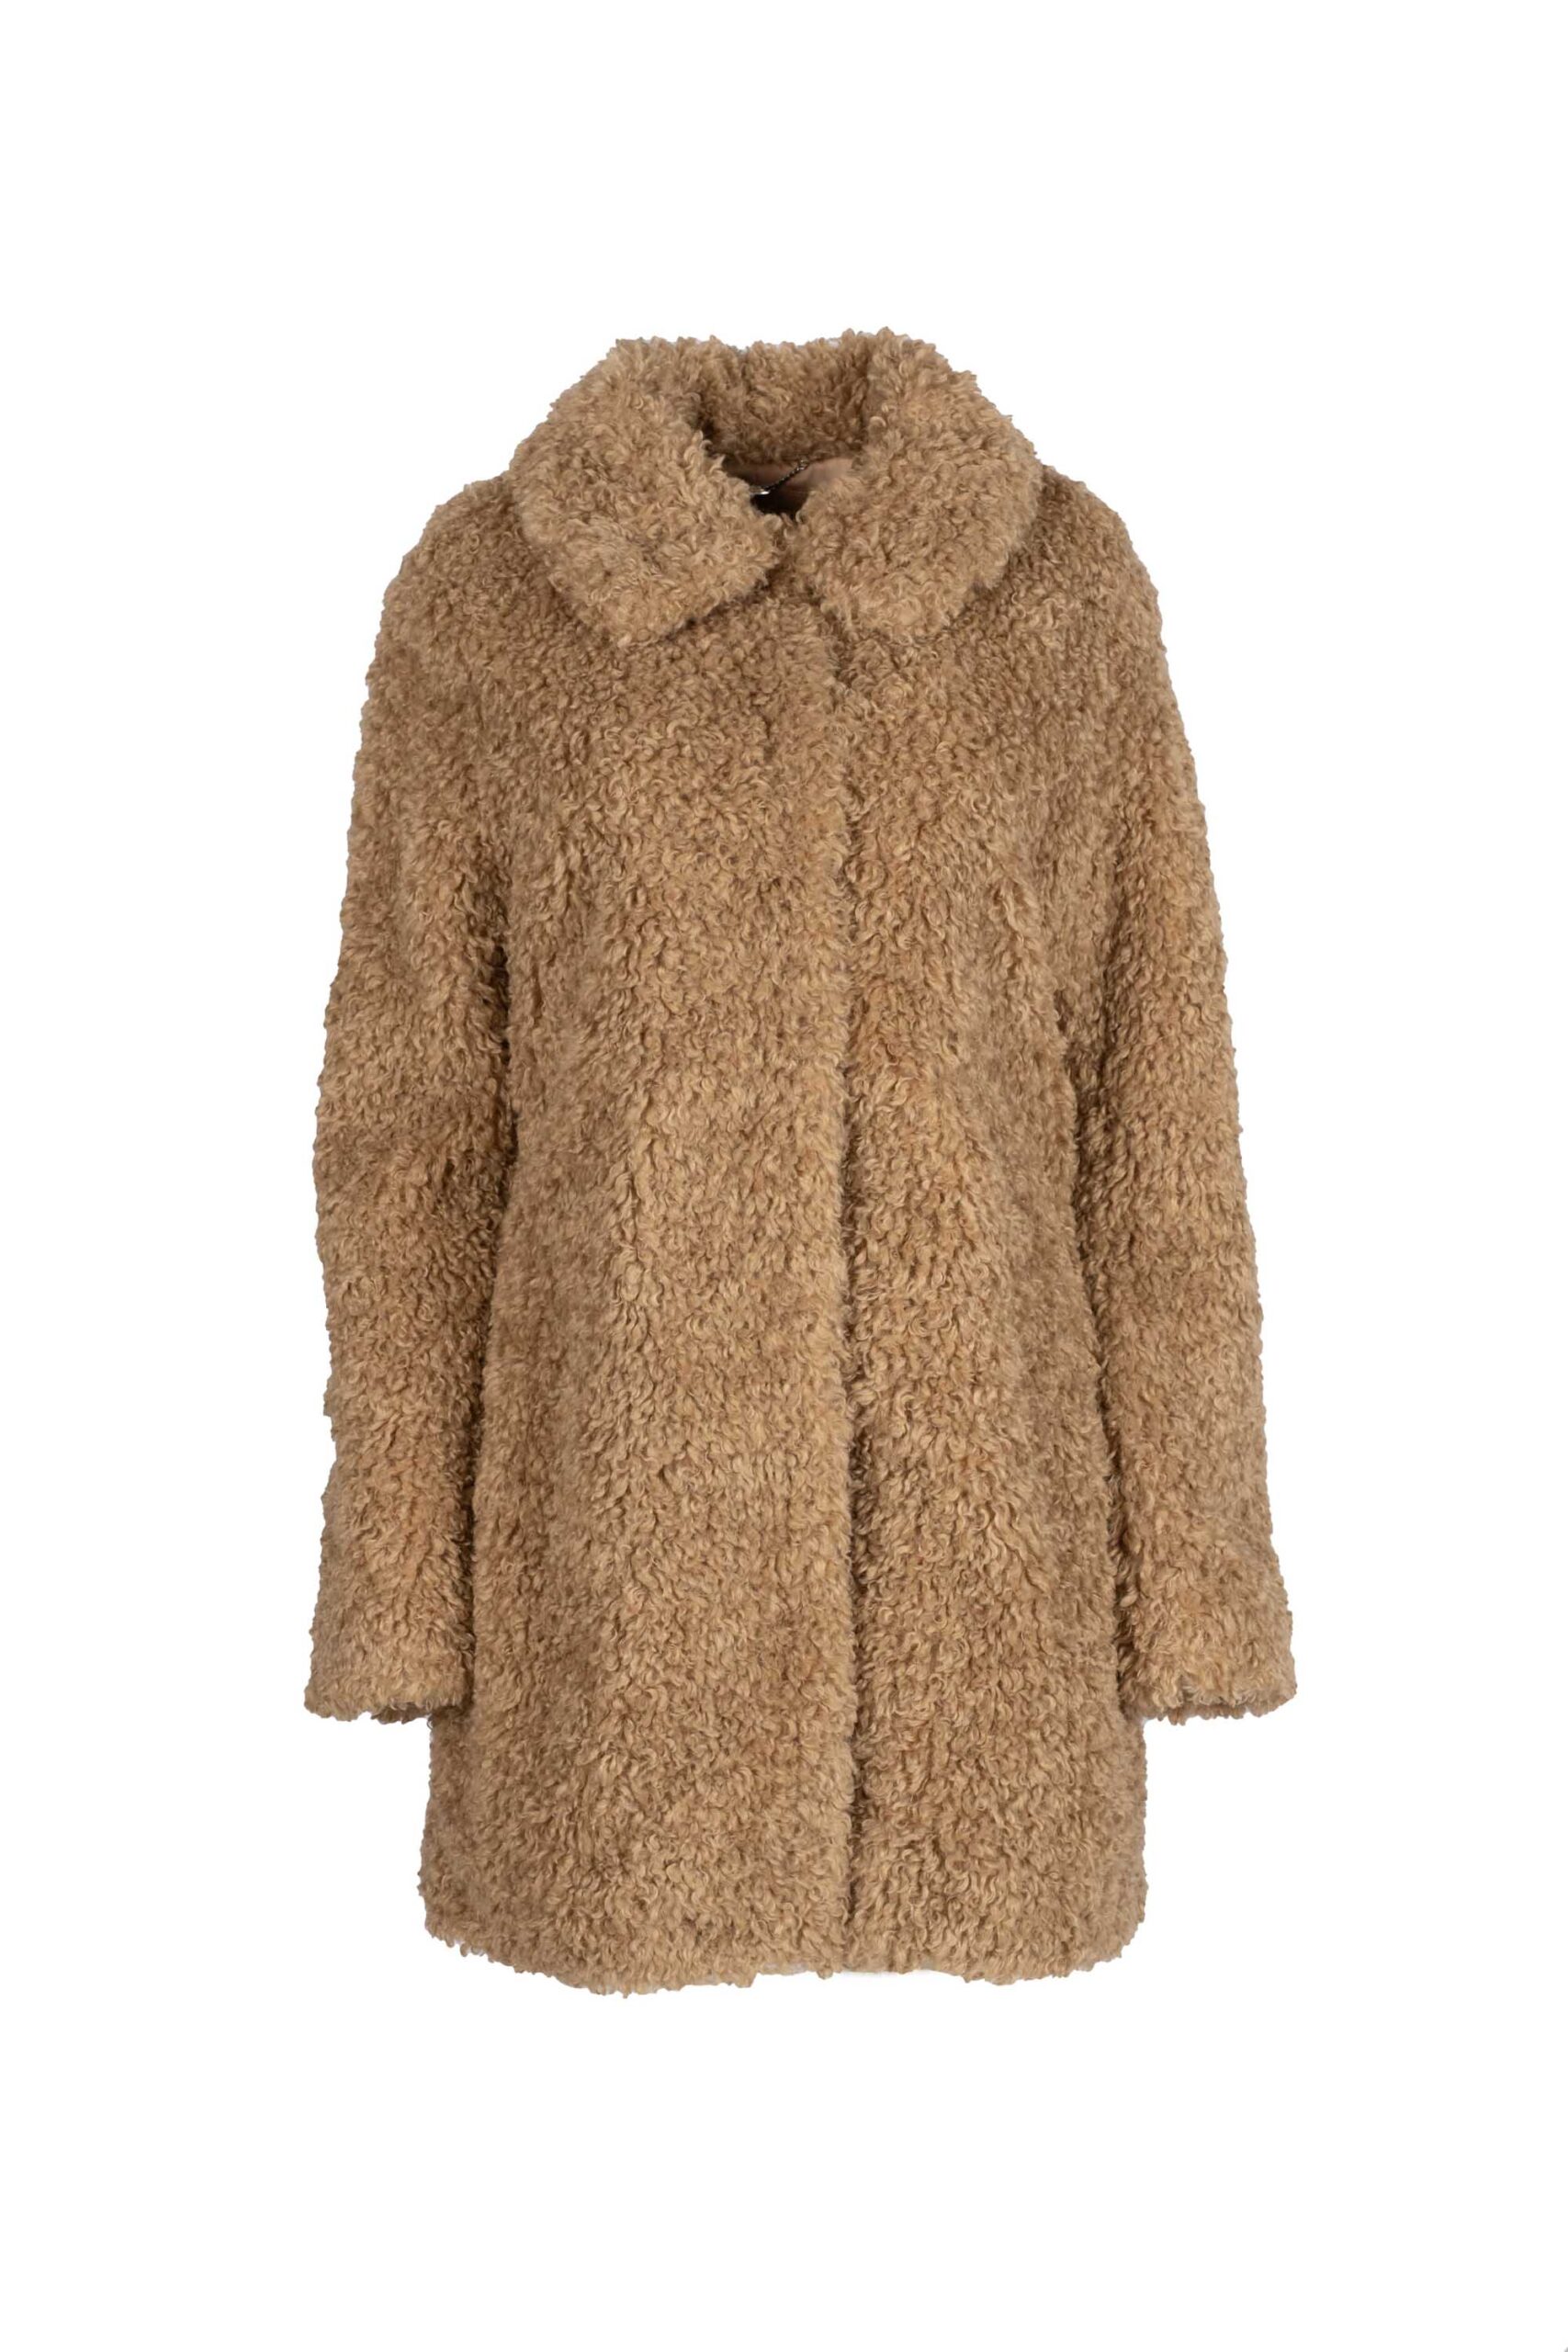 Shaggy Wool Duster Coat with Rounded Collar